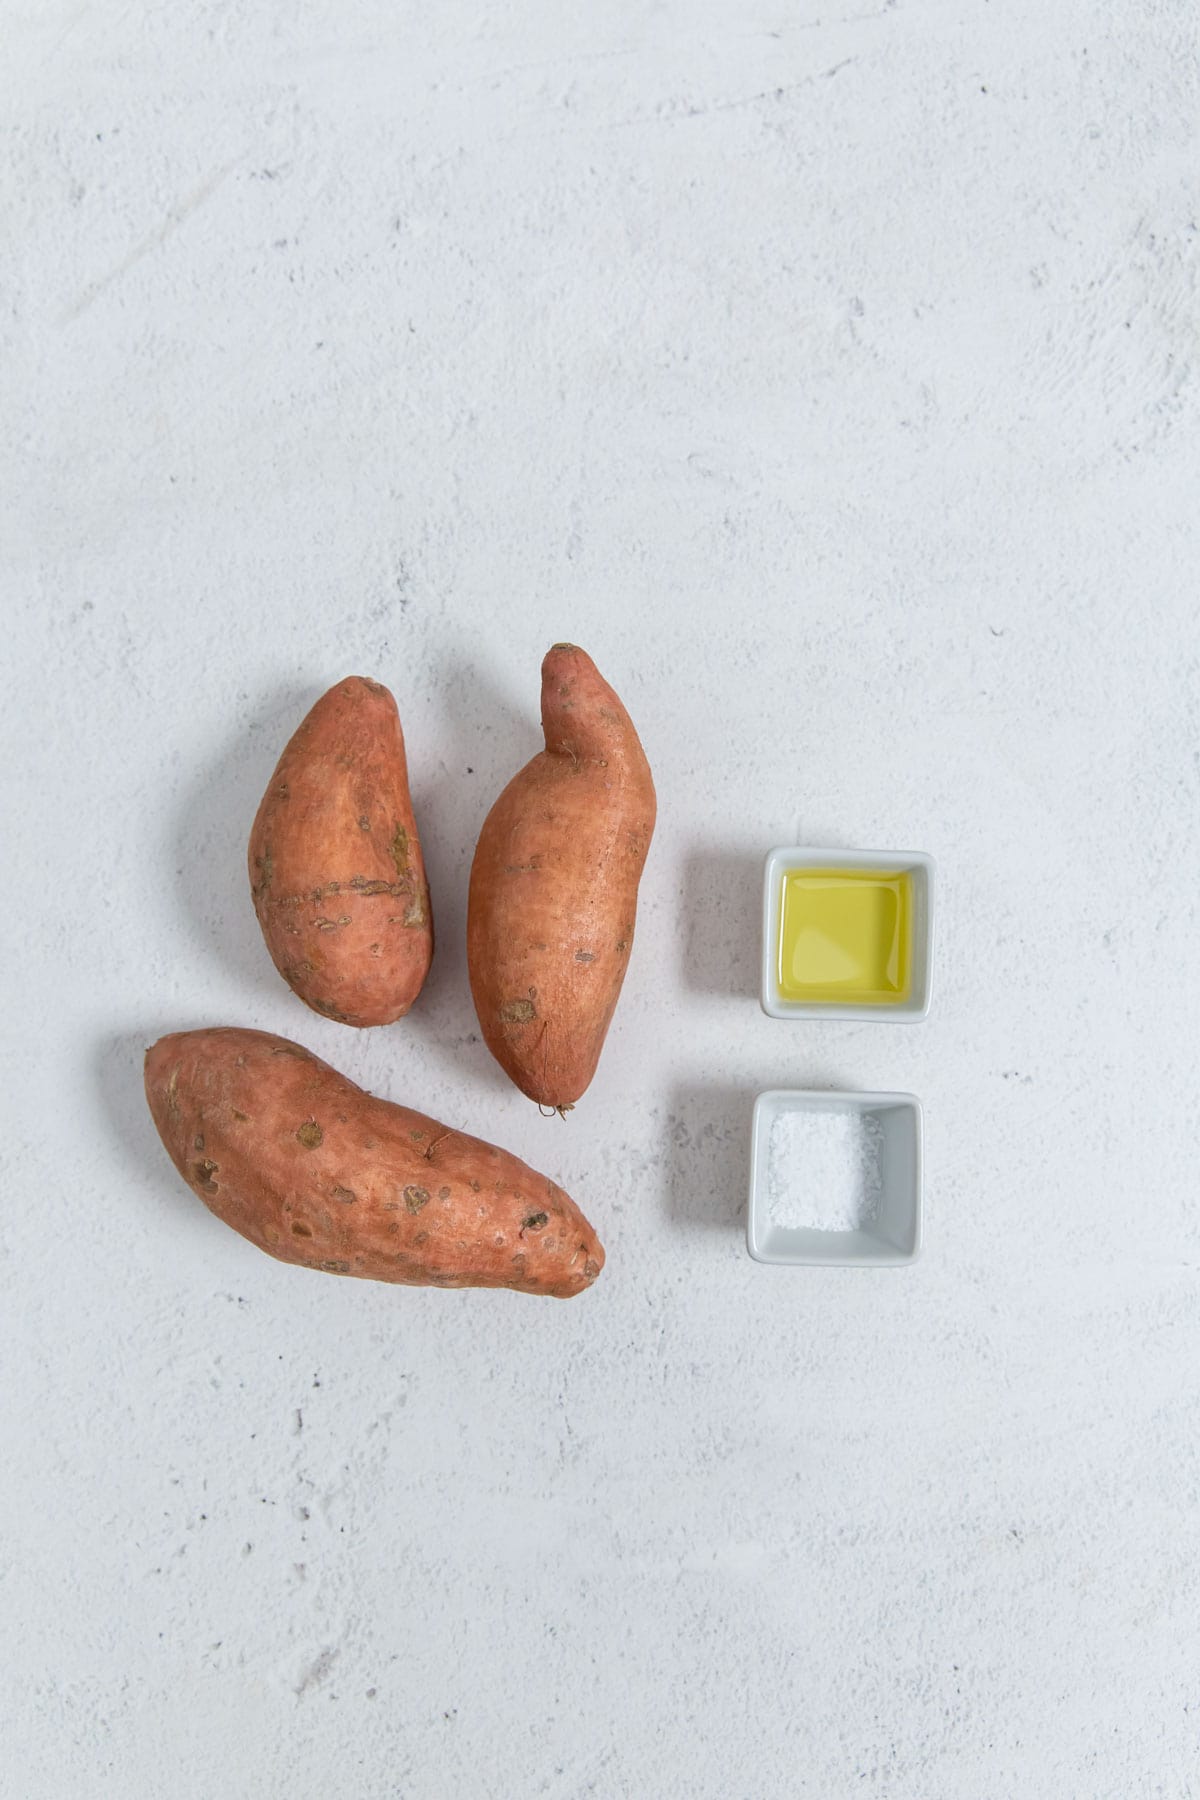 Sweet potatoes and oil on a white background.